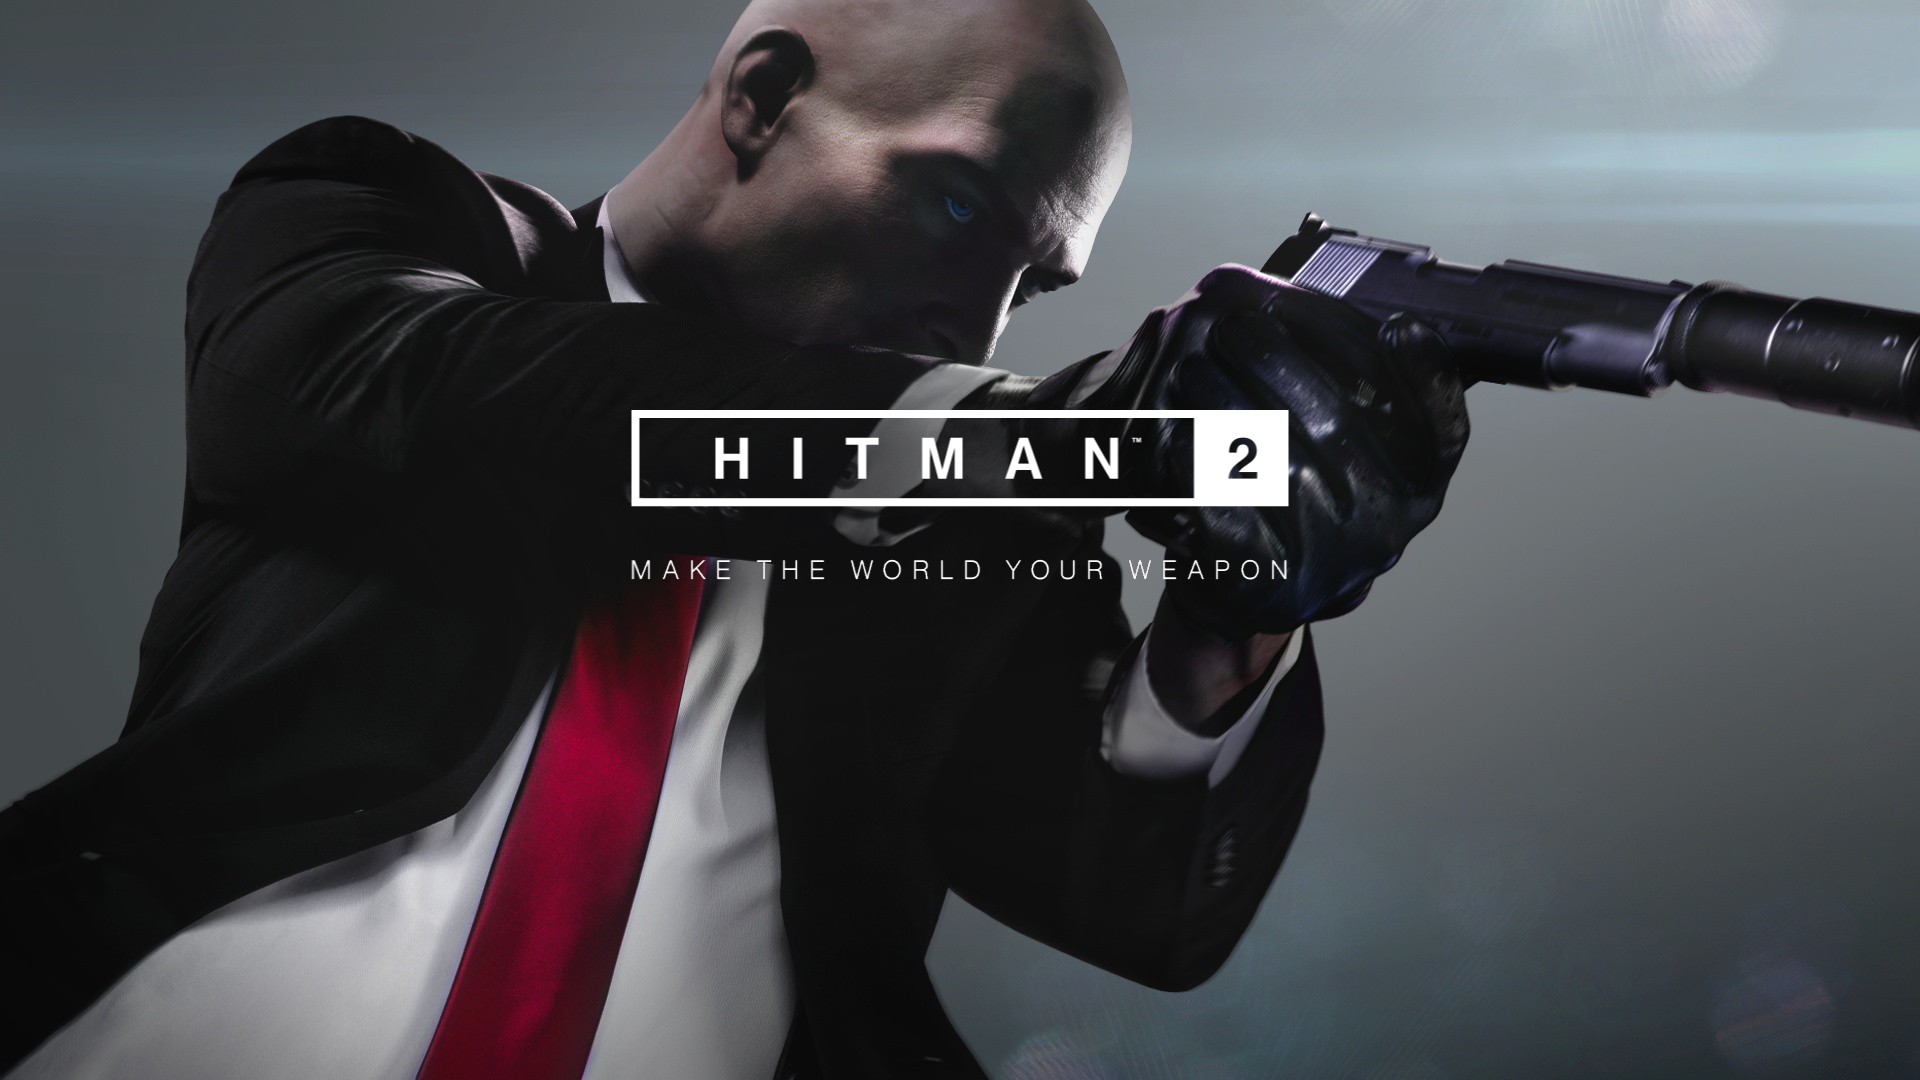 Hitman 2 - make the world your weapon